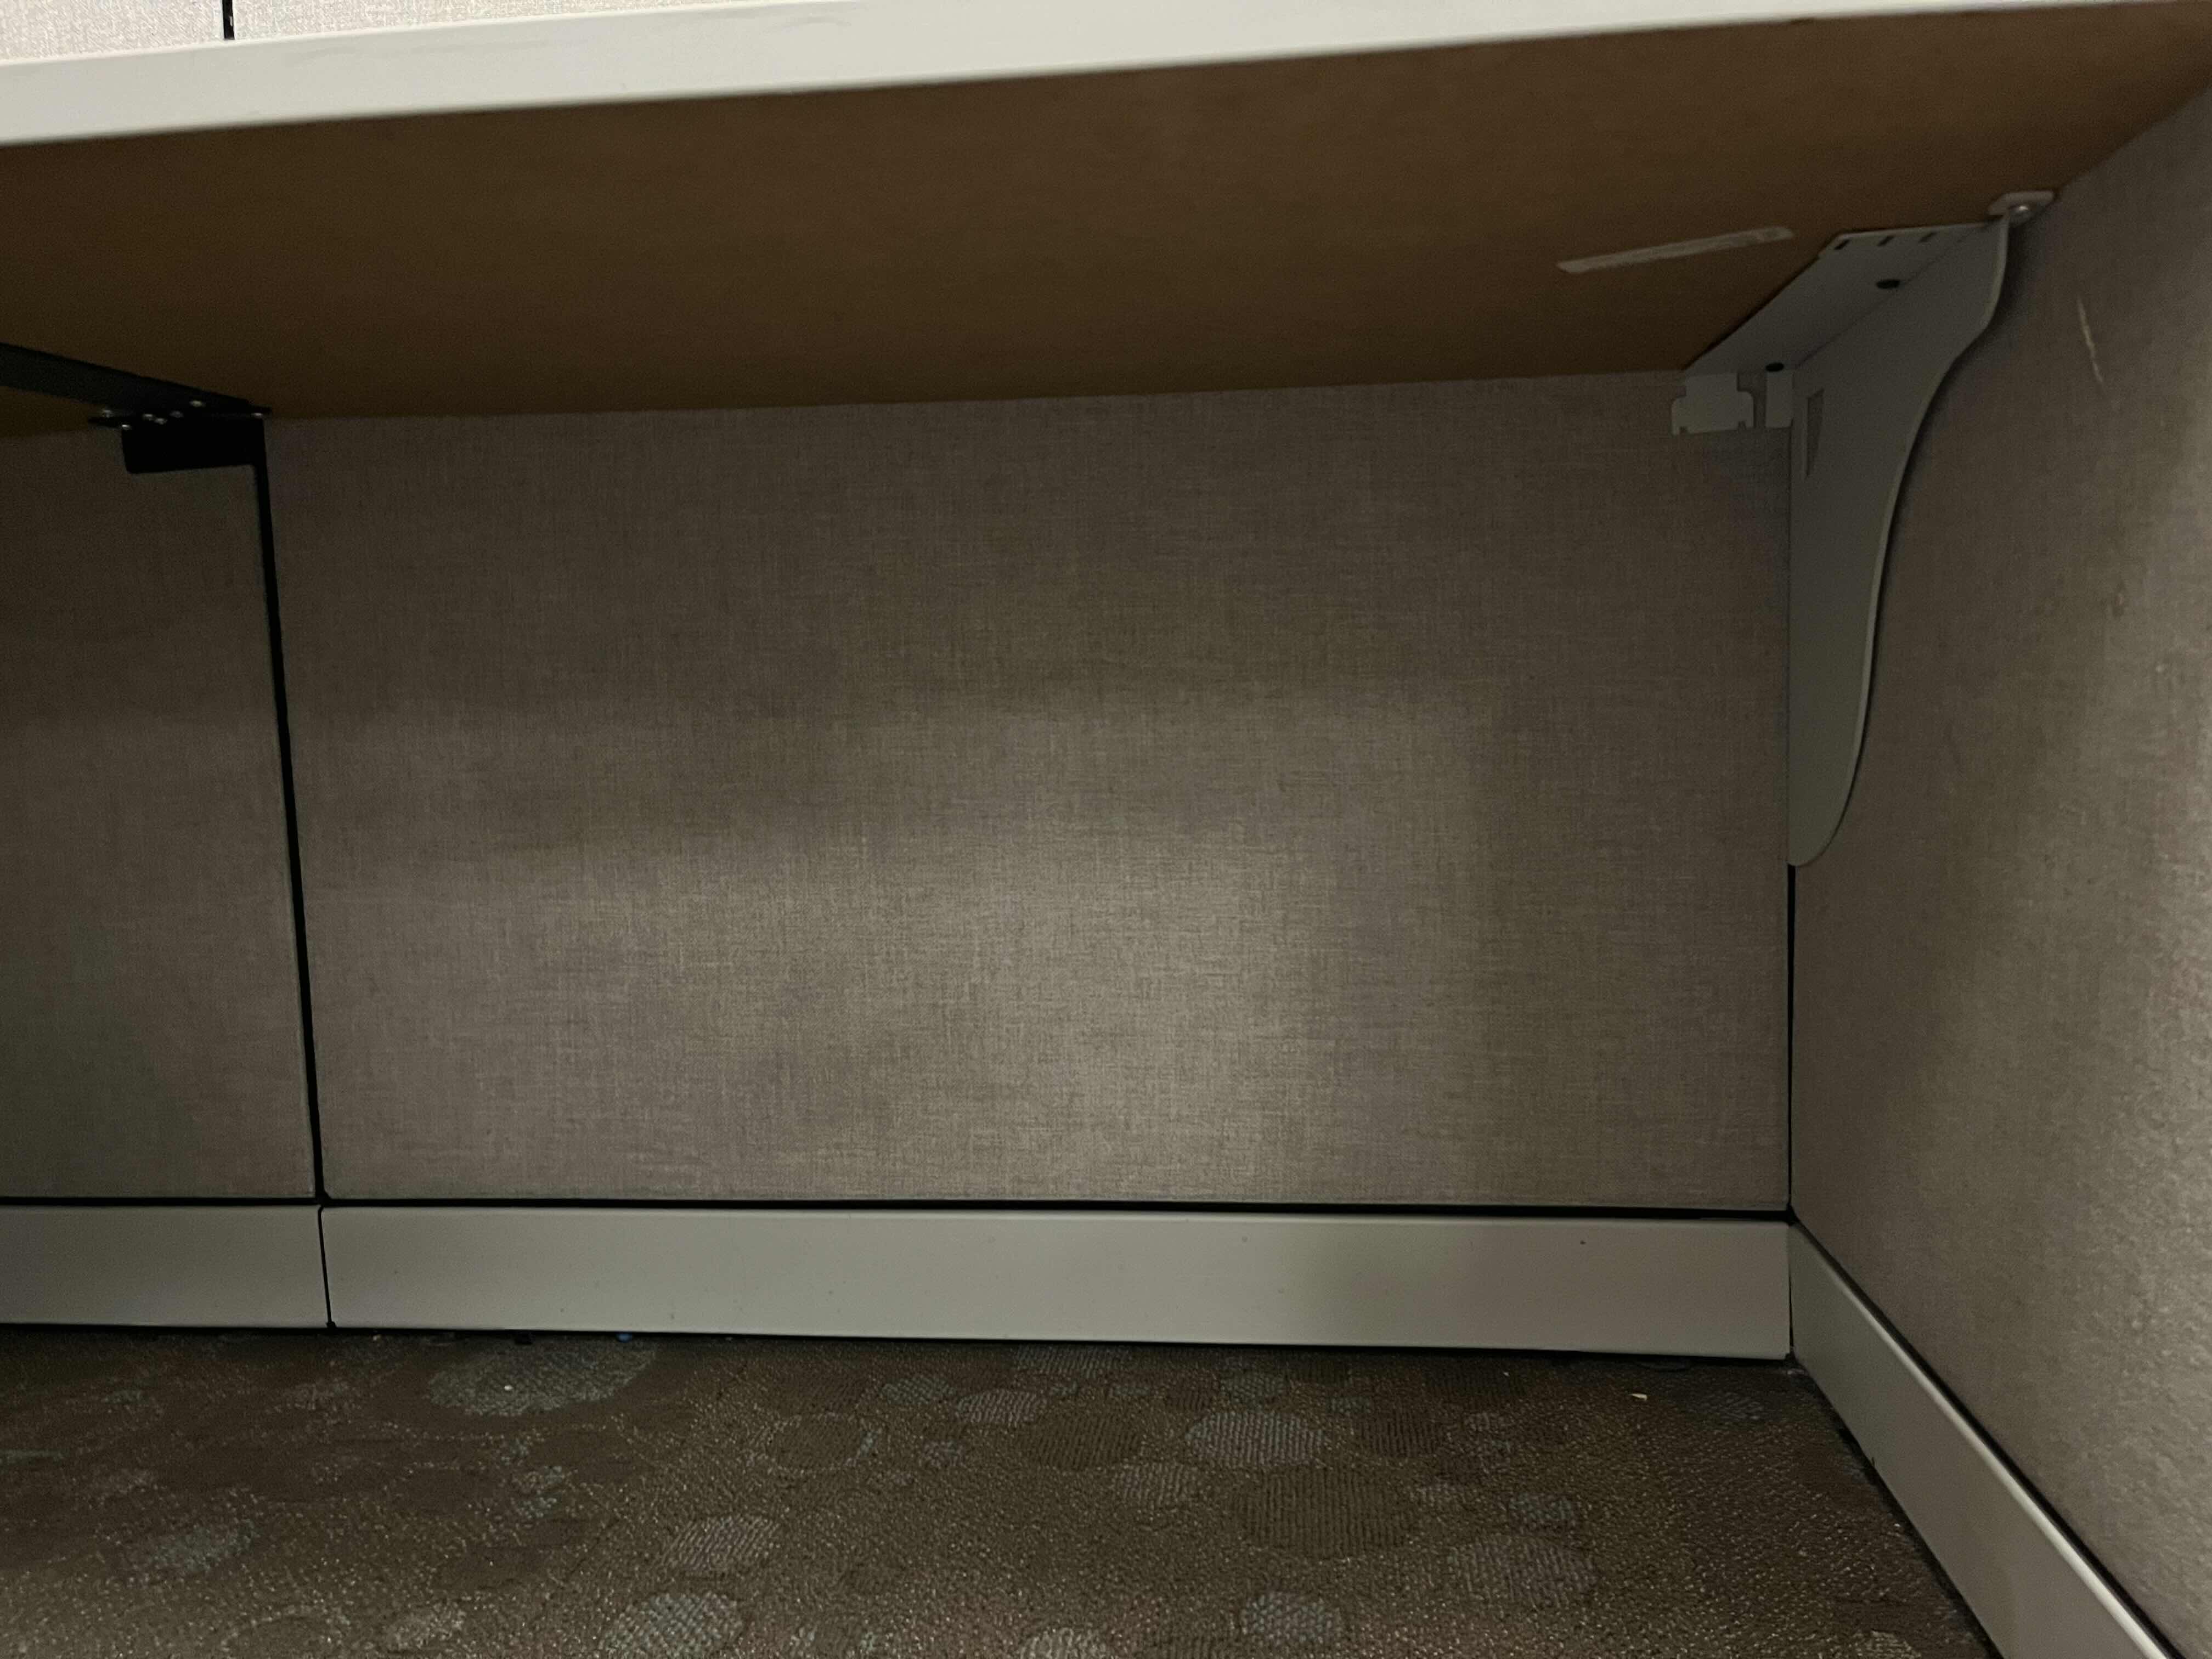 Photo 4 of STEELCASE BUILT IN CUBICLE L SHAPE 3 DRAWER OFFICE DESK 72” X 72” H27.5” W 4 CUBICLE PANELS 30.5”-42” X 54”